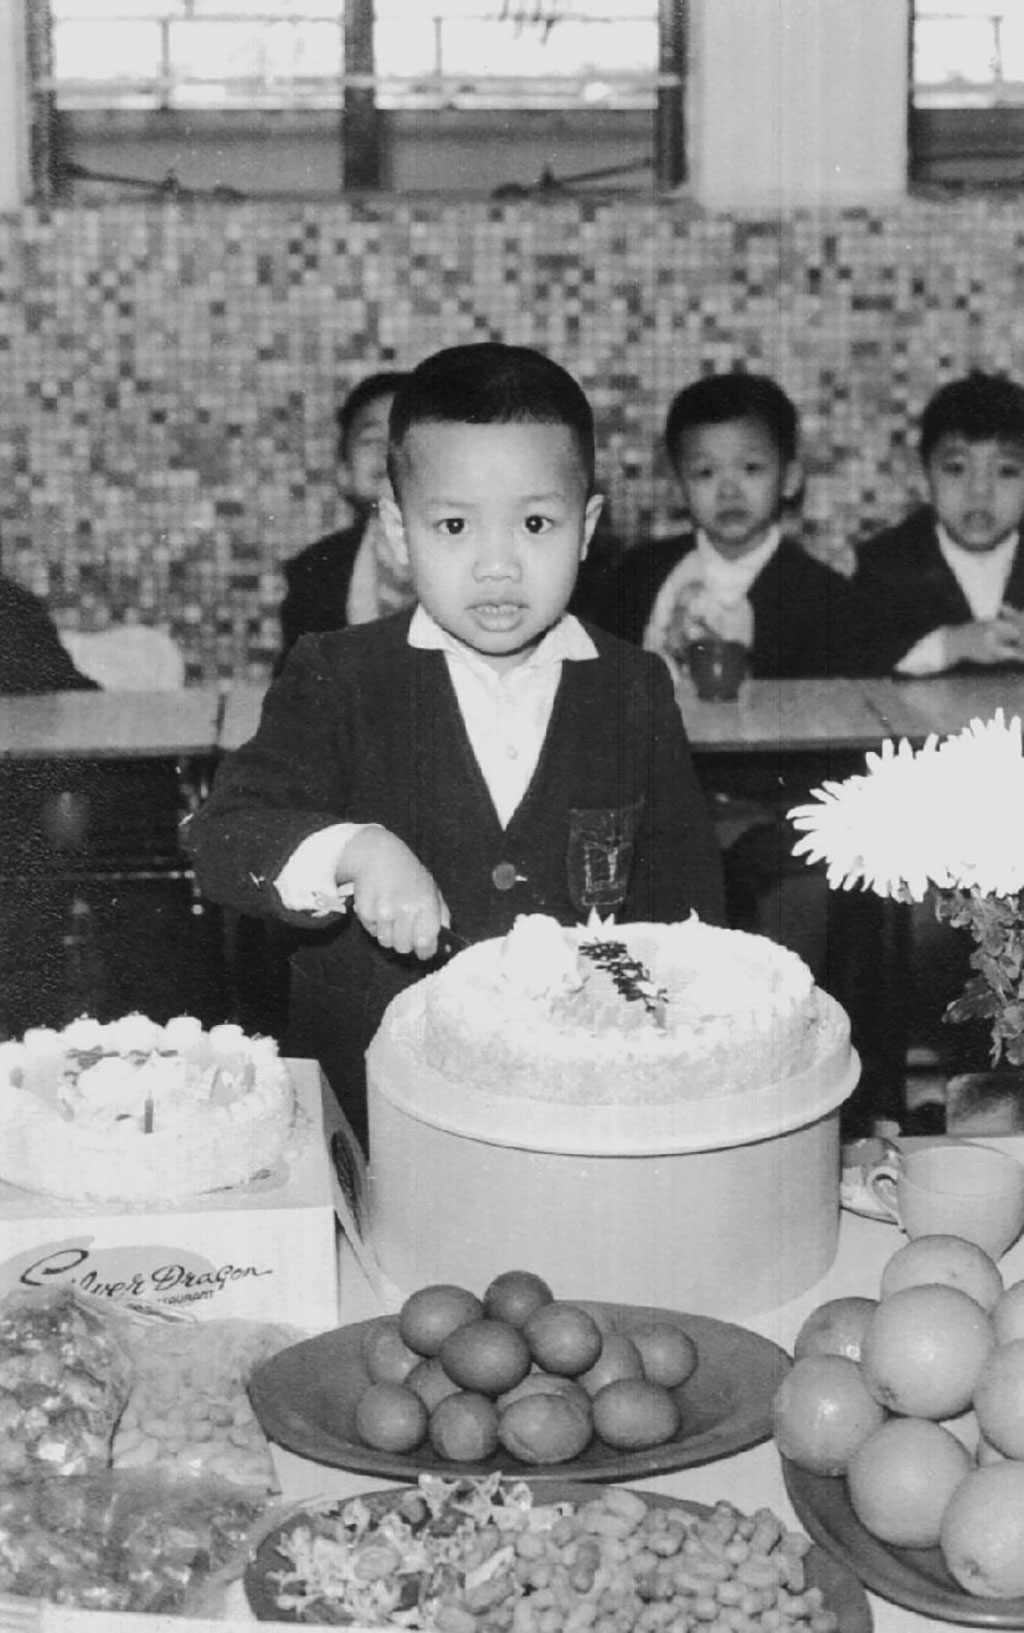 A young boy in a suit looks at the camera as he is cutting a big birthday cake.